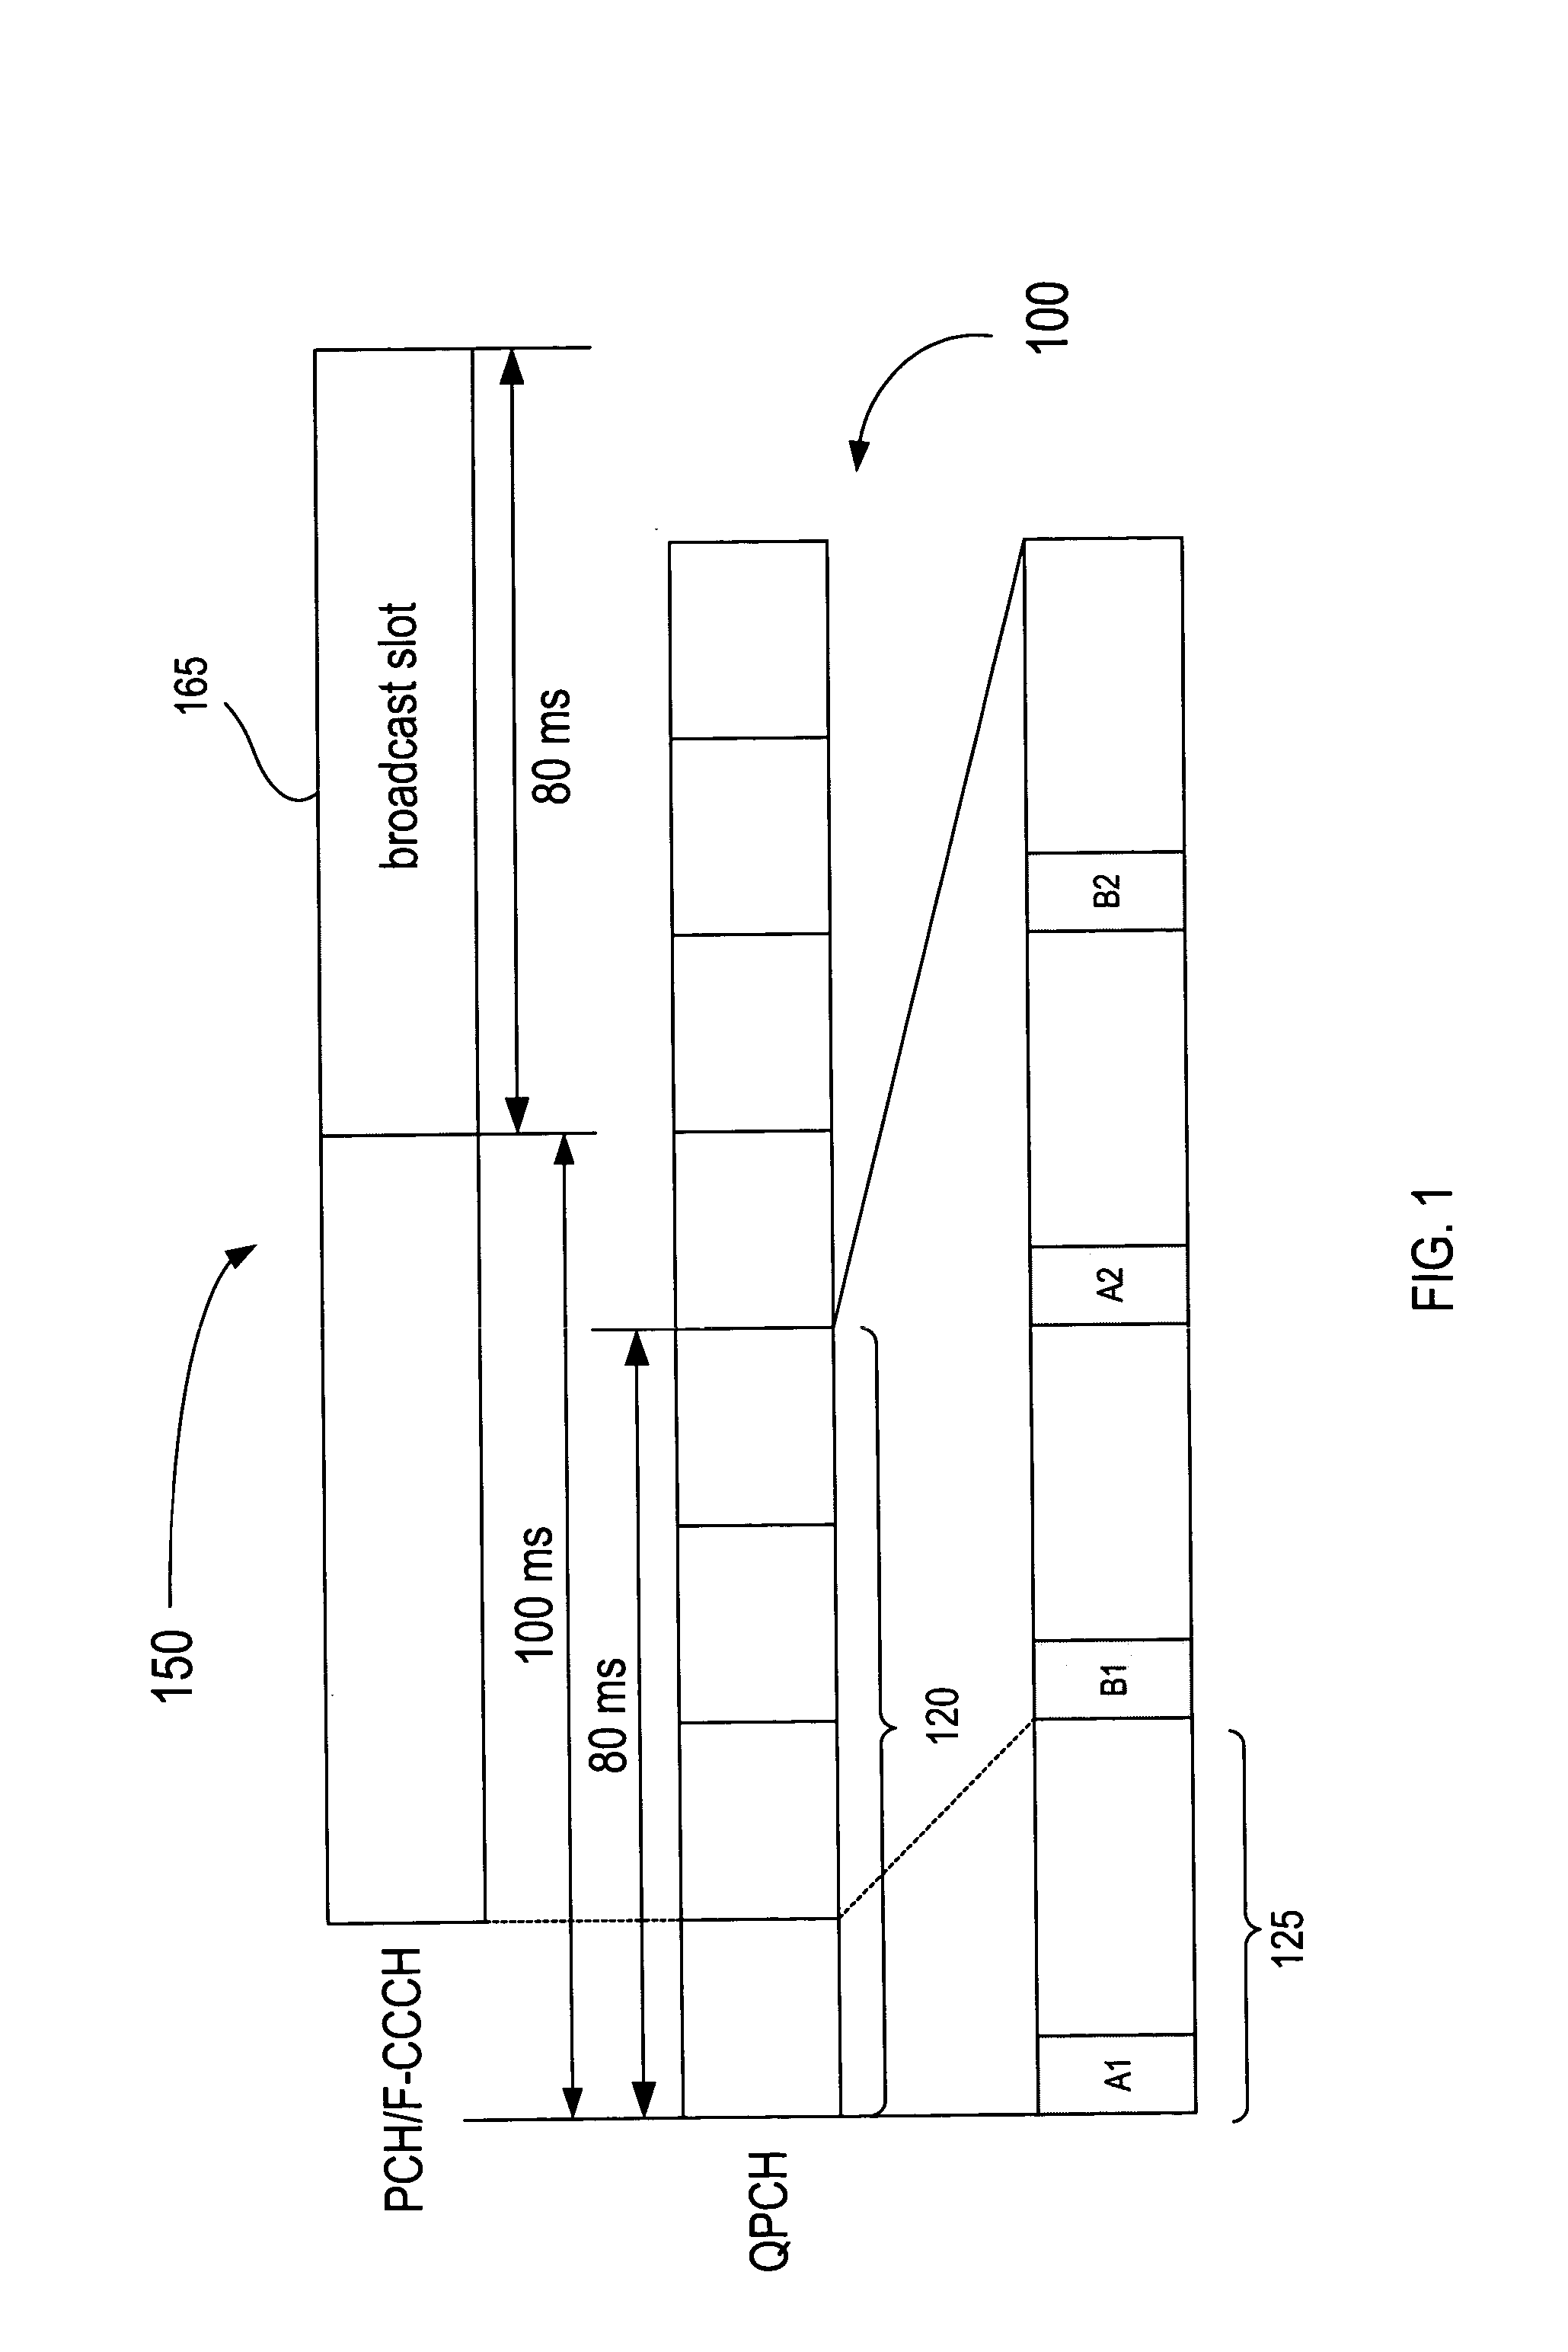 Methods for signaling broadcast and multicast information in communication networks